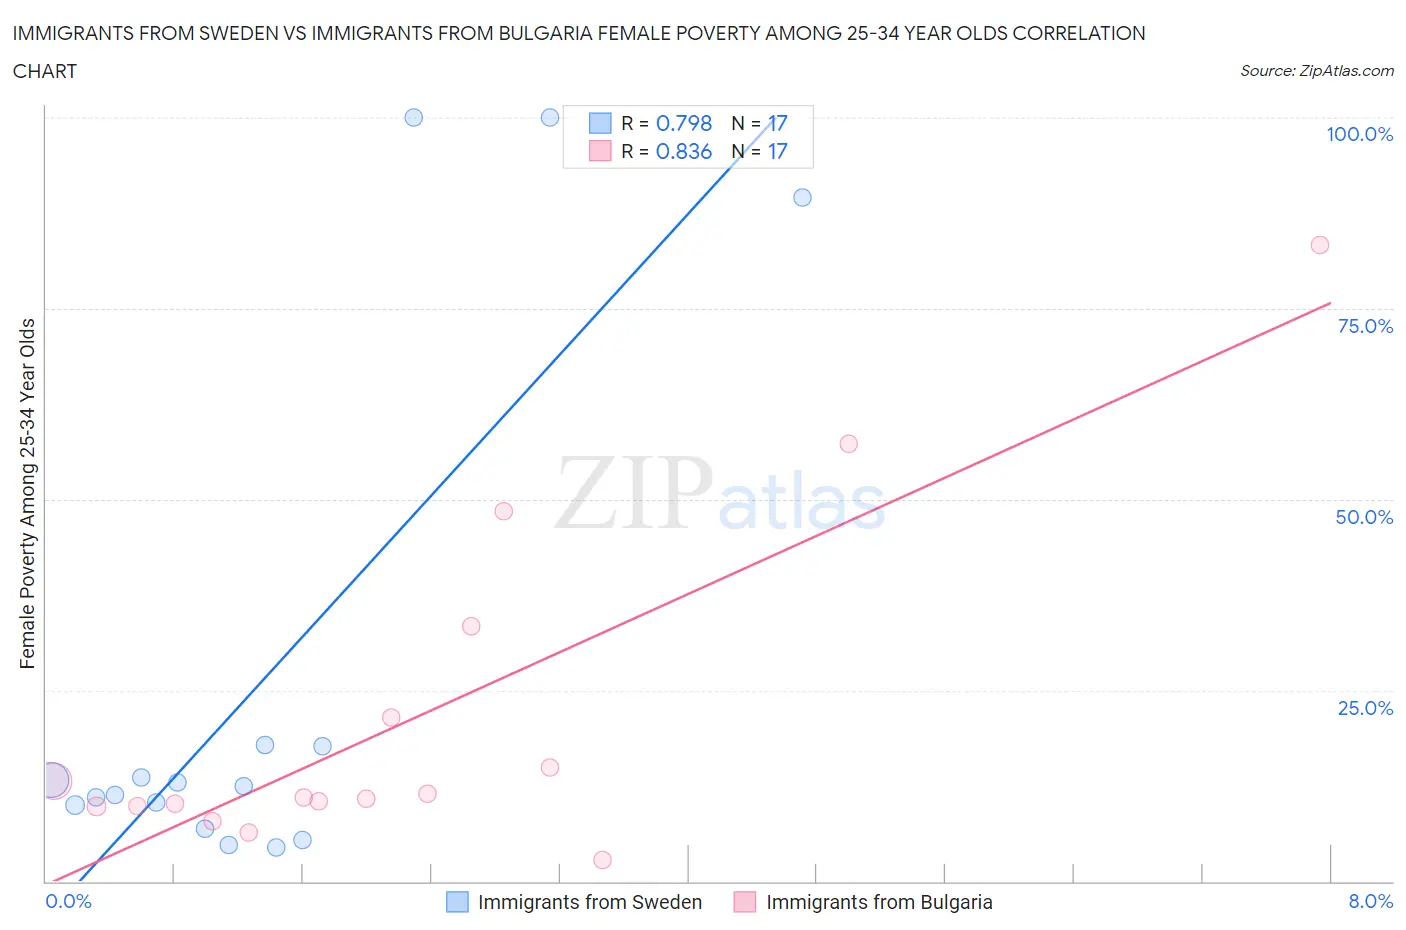 Immigrants from Sweden vs Immigrants from Bulgaria Female Poverty Among 25-34 Year Olds